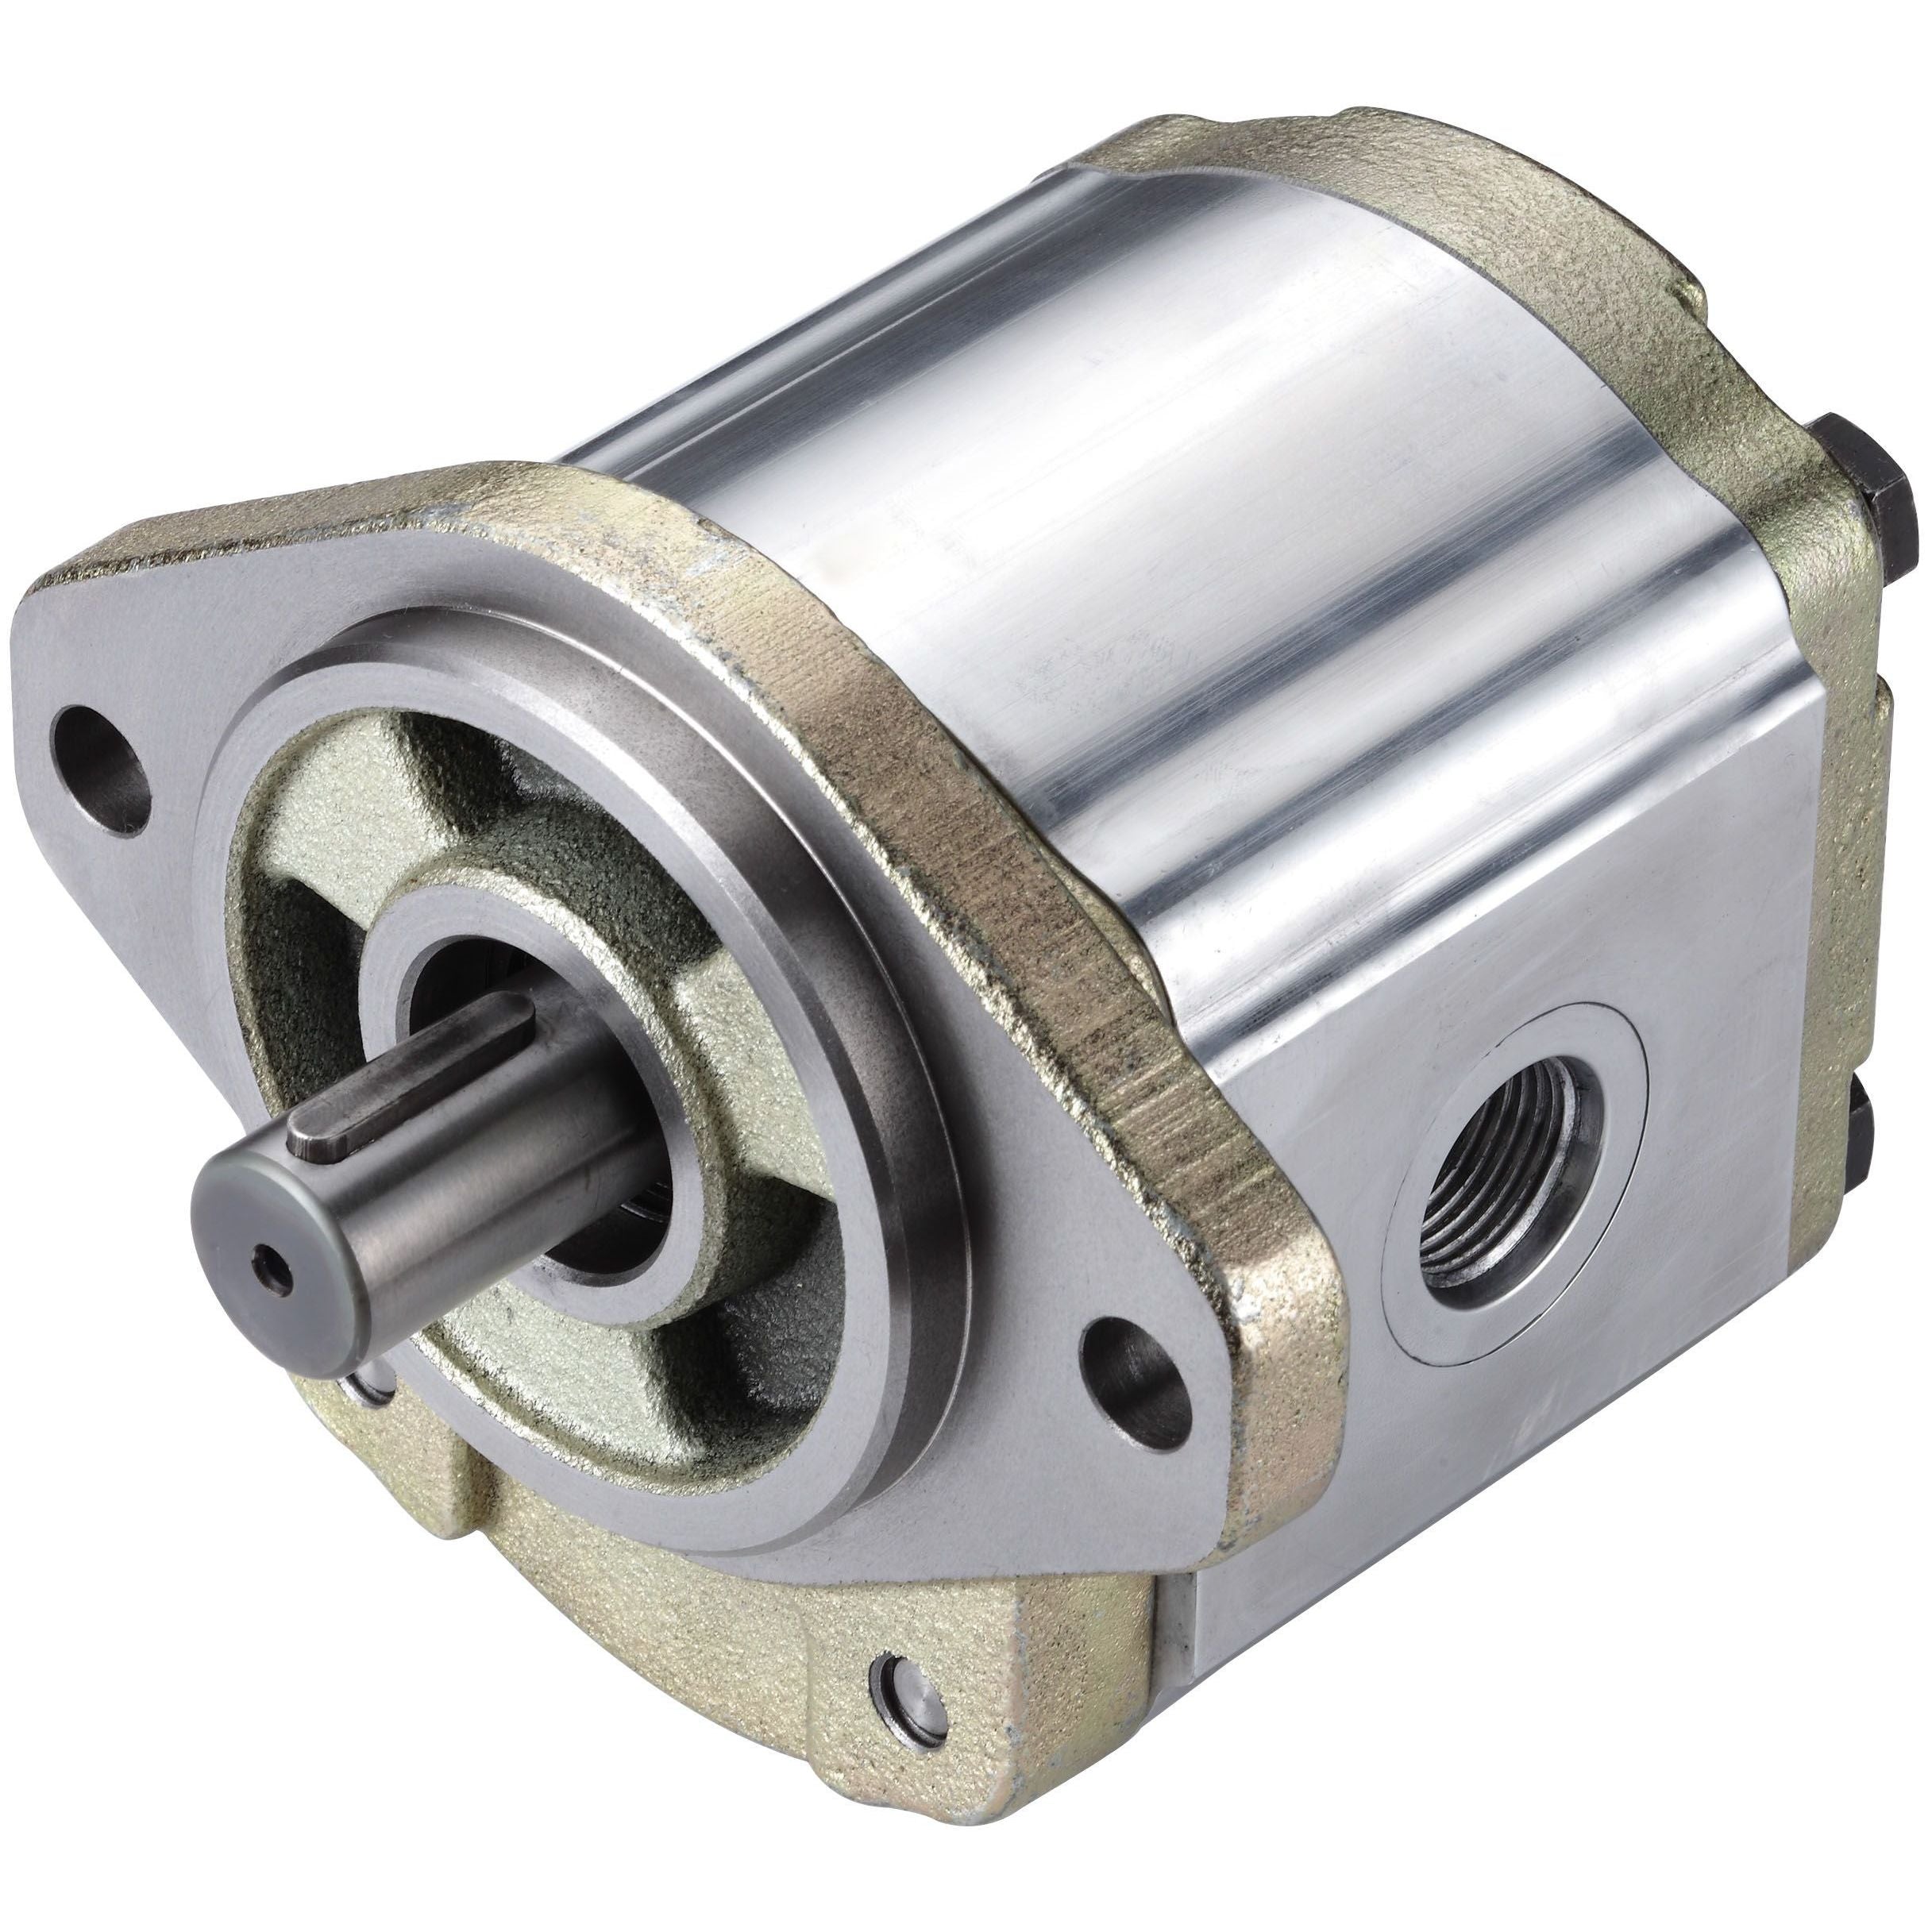 3GB8U360L : Honor Gear Pump, CCW Rotation, 60cc (3.66in3), 28.53 GPM, 2600psi, 2500 RPM, #24 SAE (1.5") In, #16 SAE (1") Out, Splined Shaft 13-Tooth, 16/32 Pitch, SAE B 2-Bolt Mount